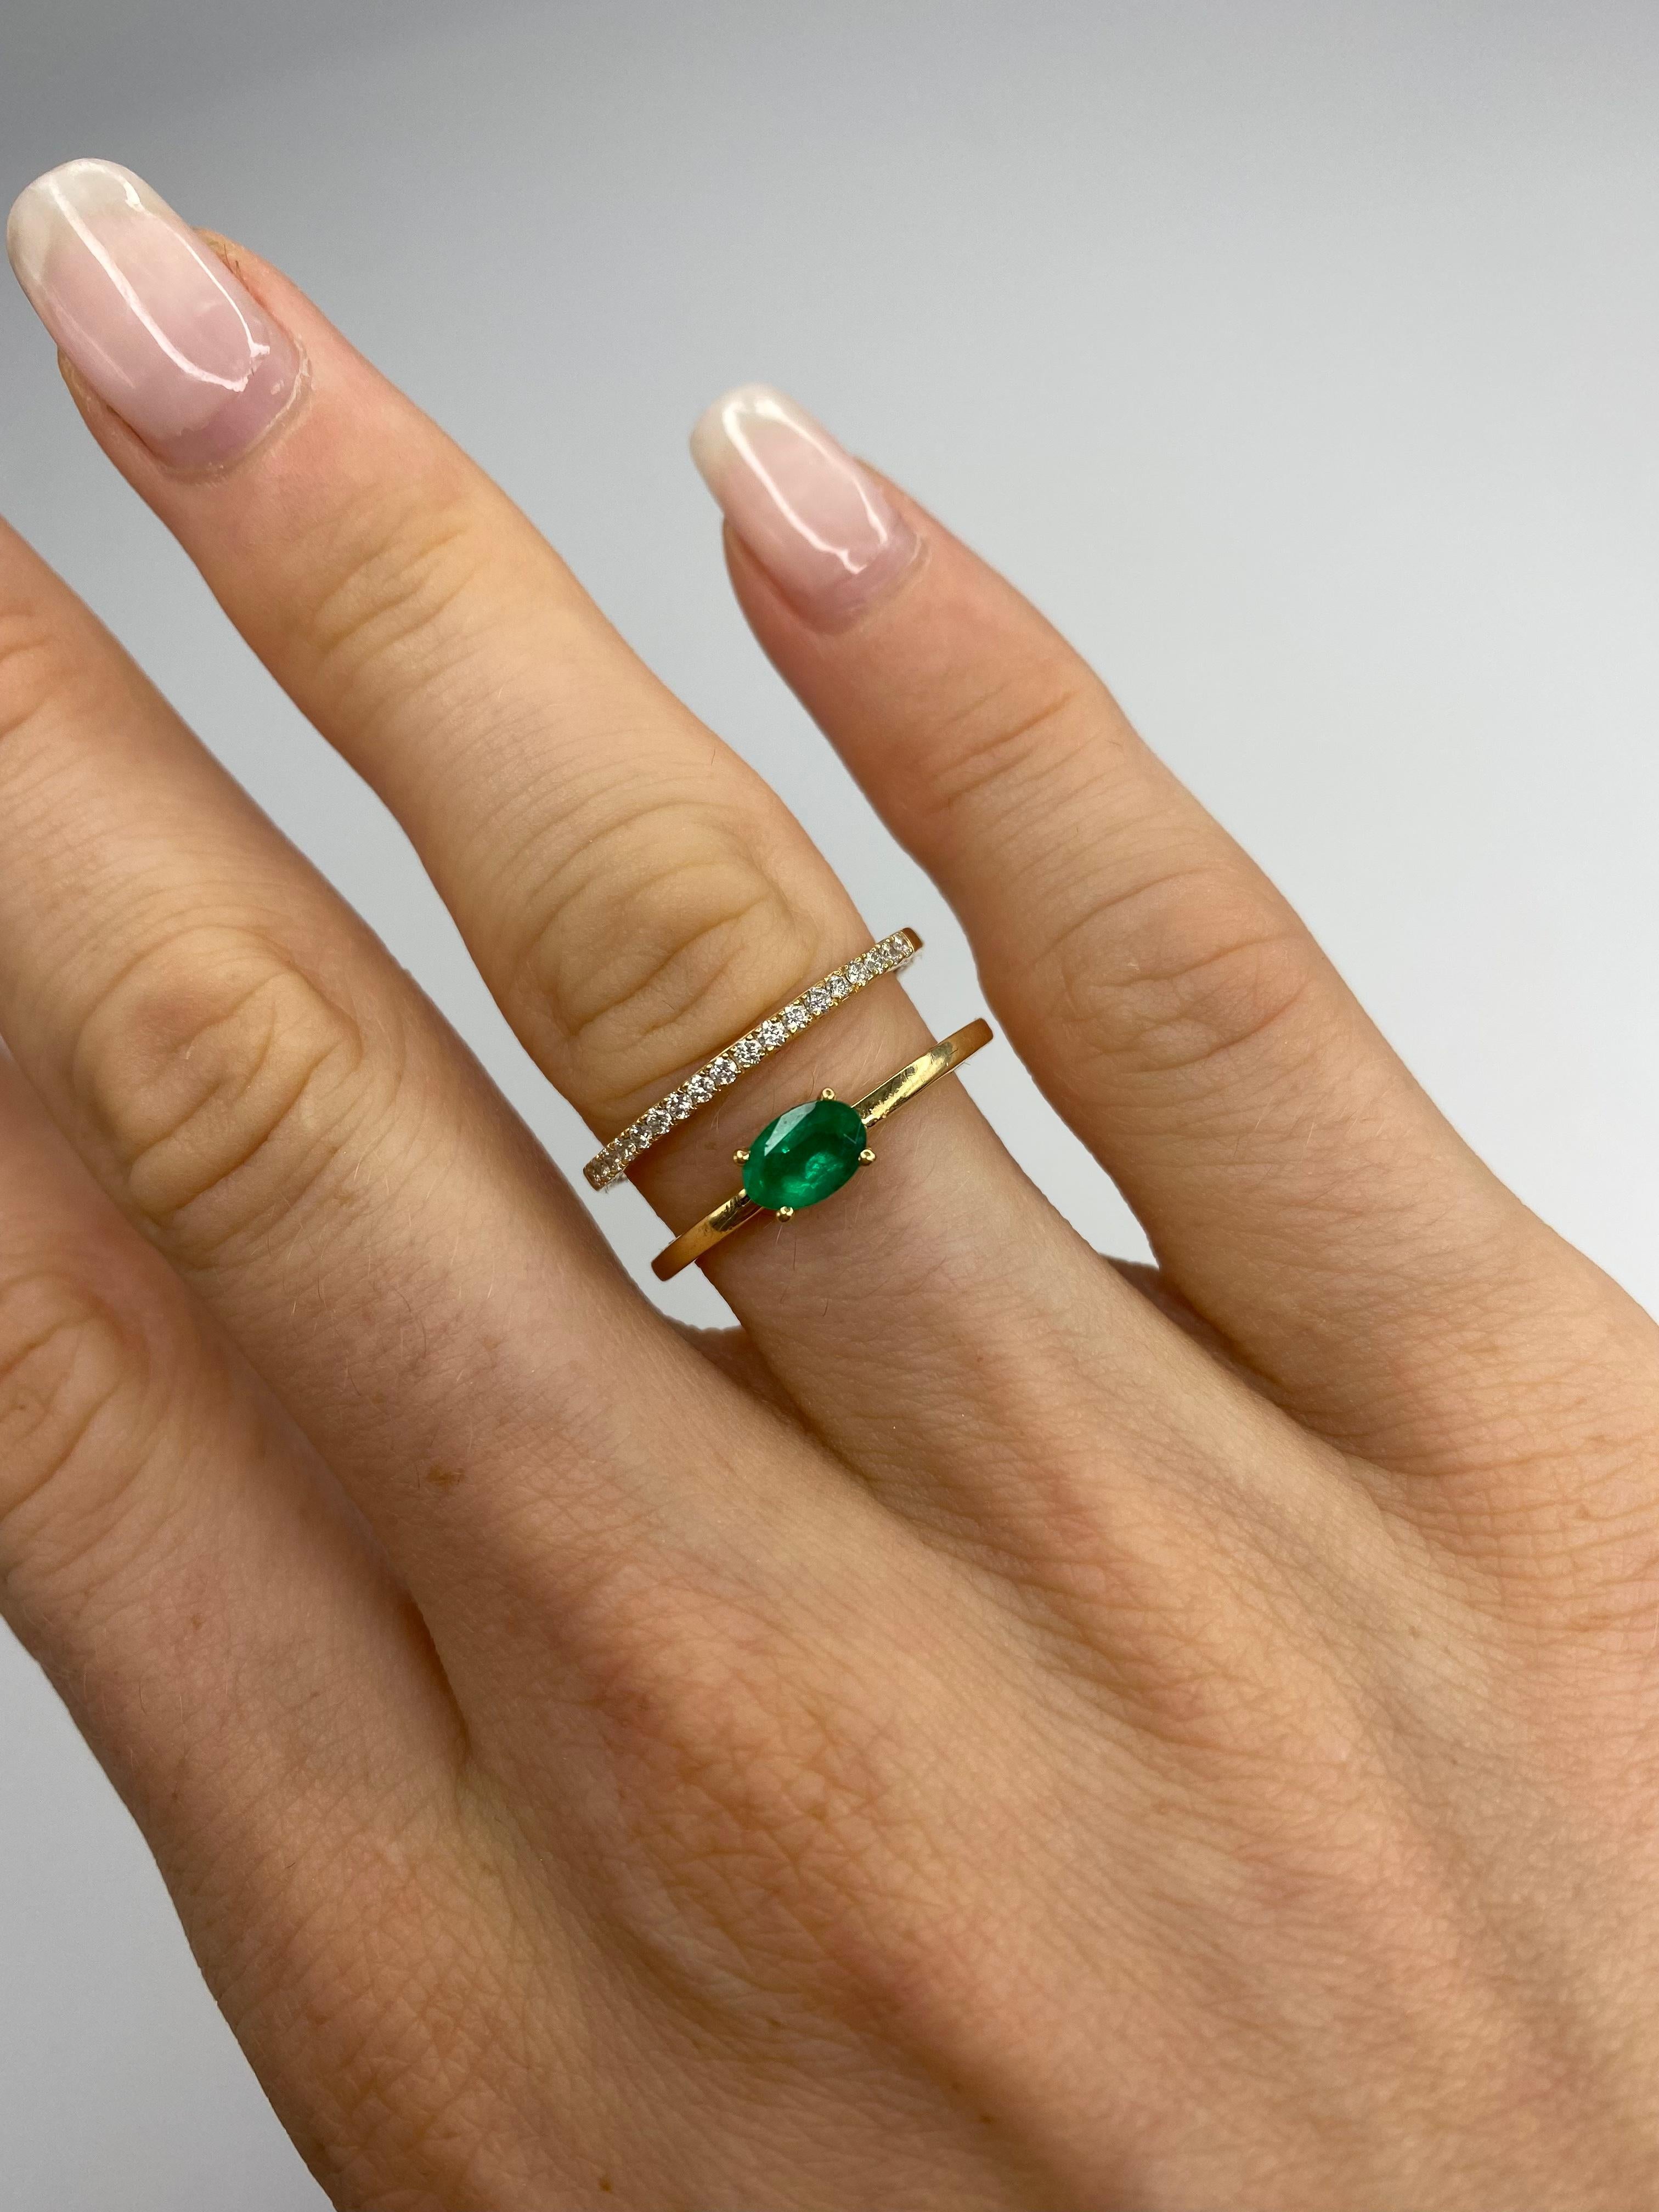 Featuring an oval cut 0.44 Carat Emerald on the right and 19 round diamonds on the left. This design represents traditional aesthetics and beauty that exude nobility. The ring is light weight due to its airy construction but still looks voluminous